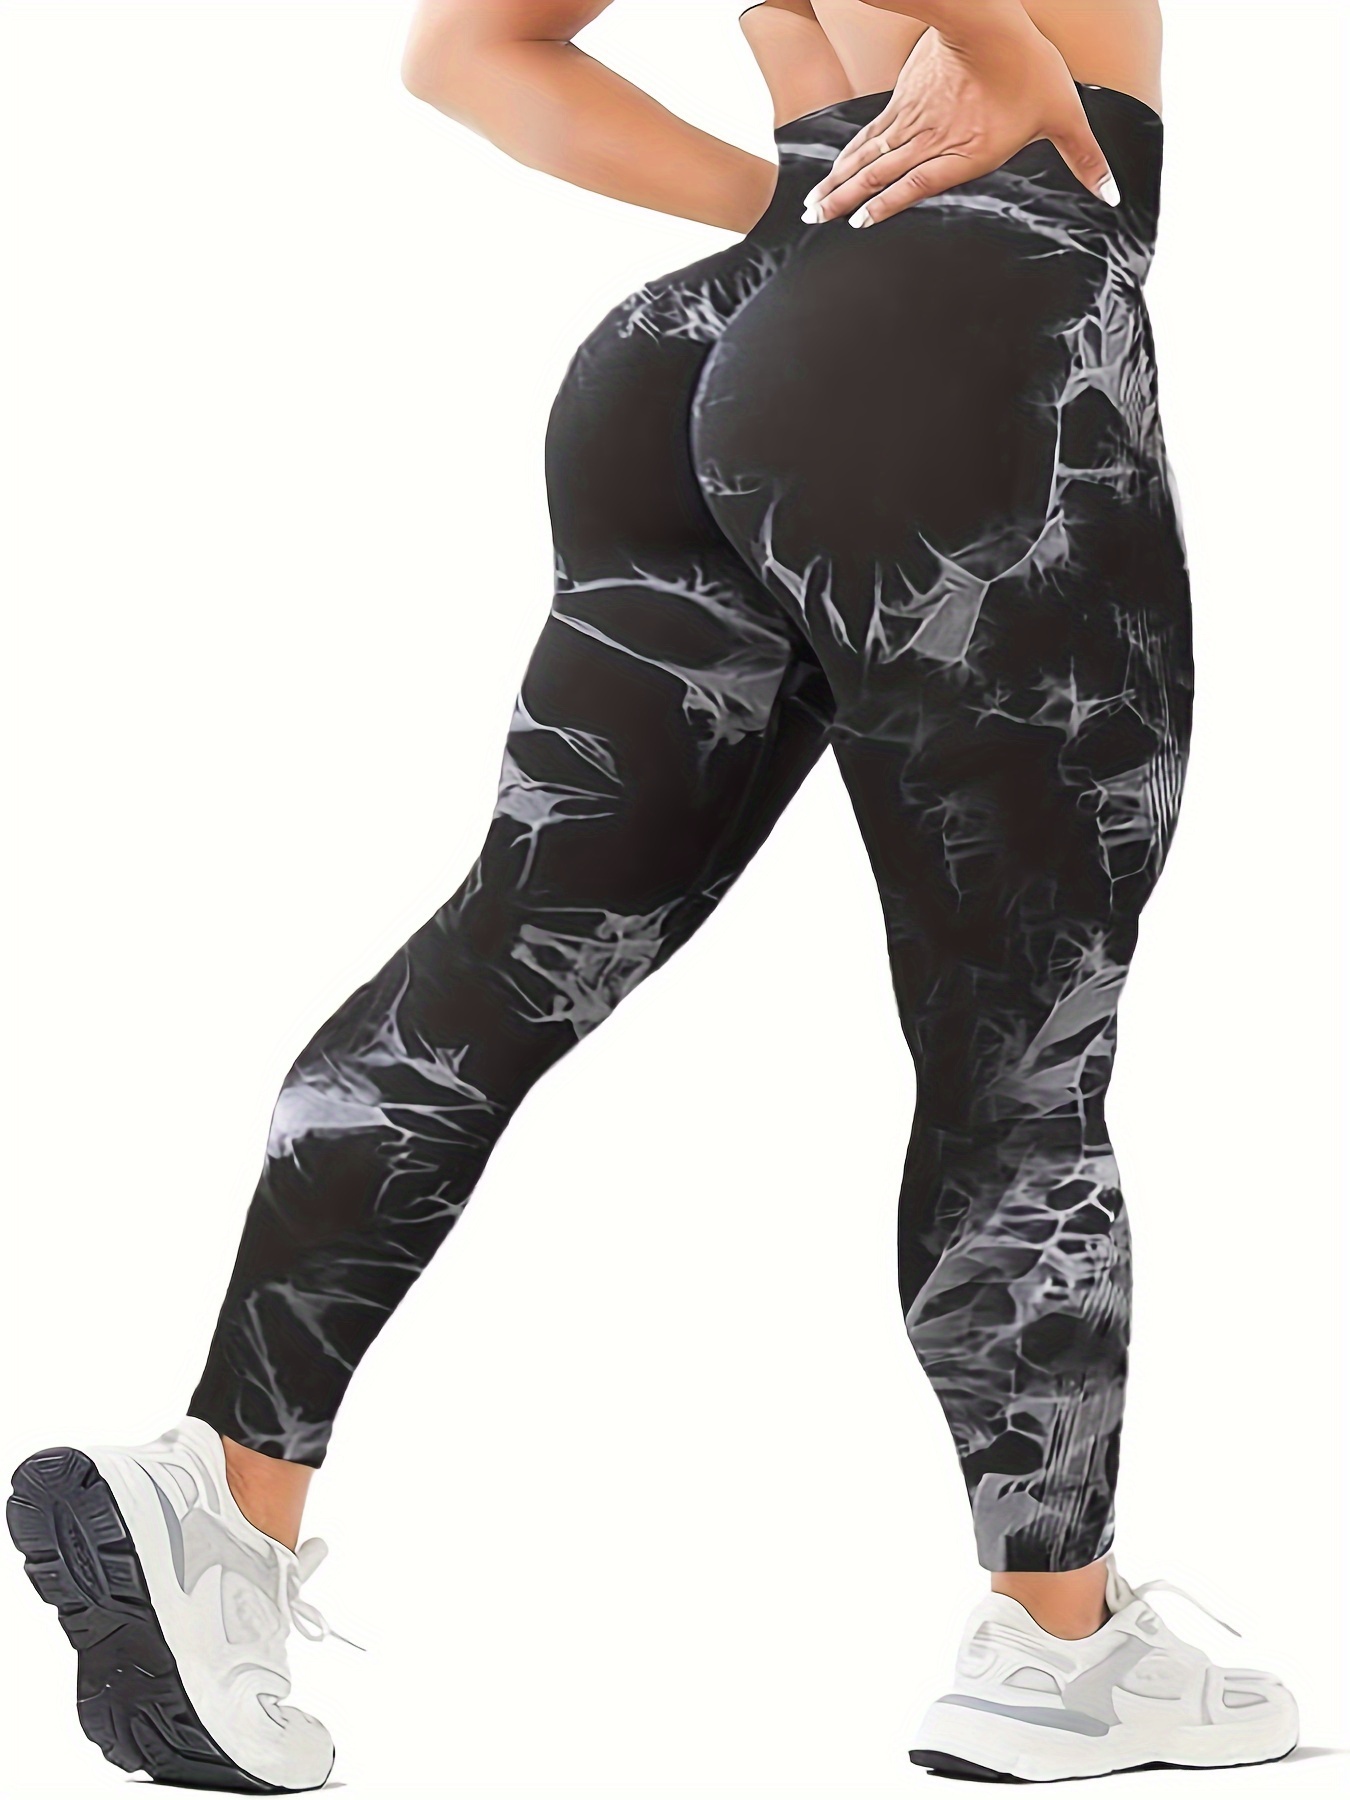 HSMQHJWE Leggings for Women-High Waisted Tummy Control Workout